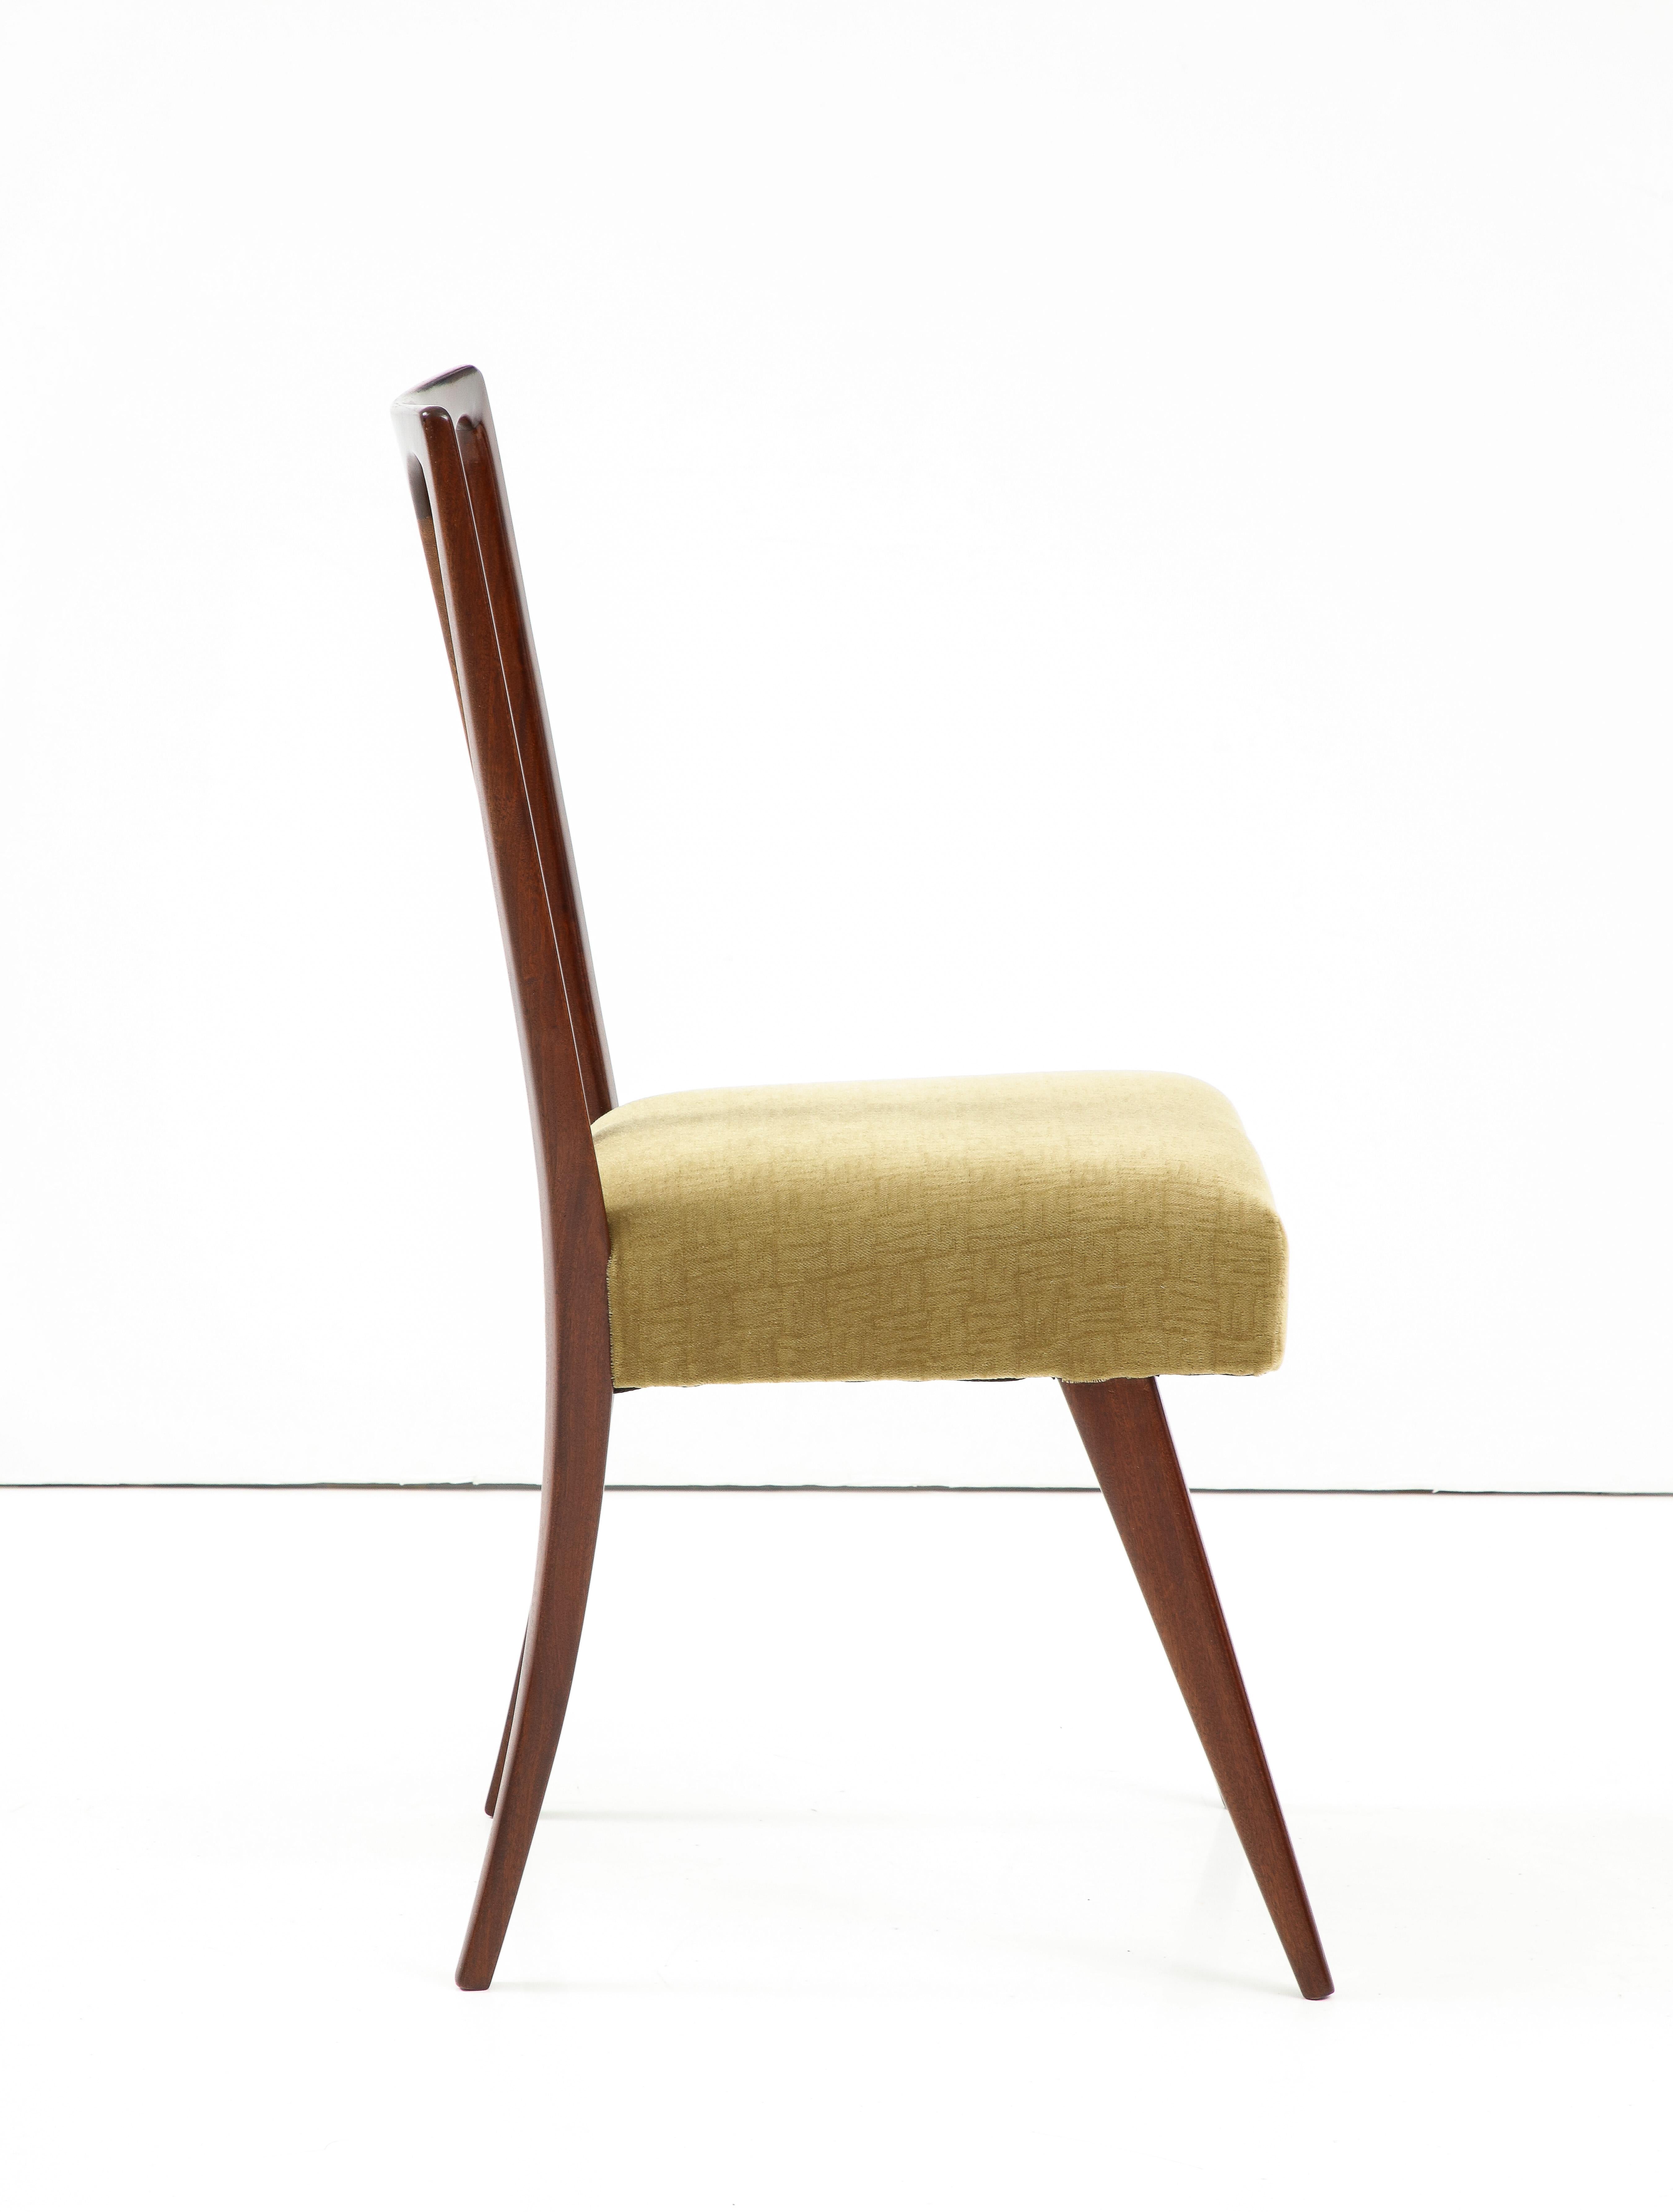 Mohair 1960's Mid-Century Modern Italian Dining Chairs In The Style Of Carlo De Carli